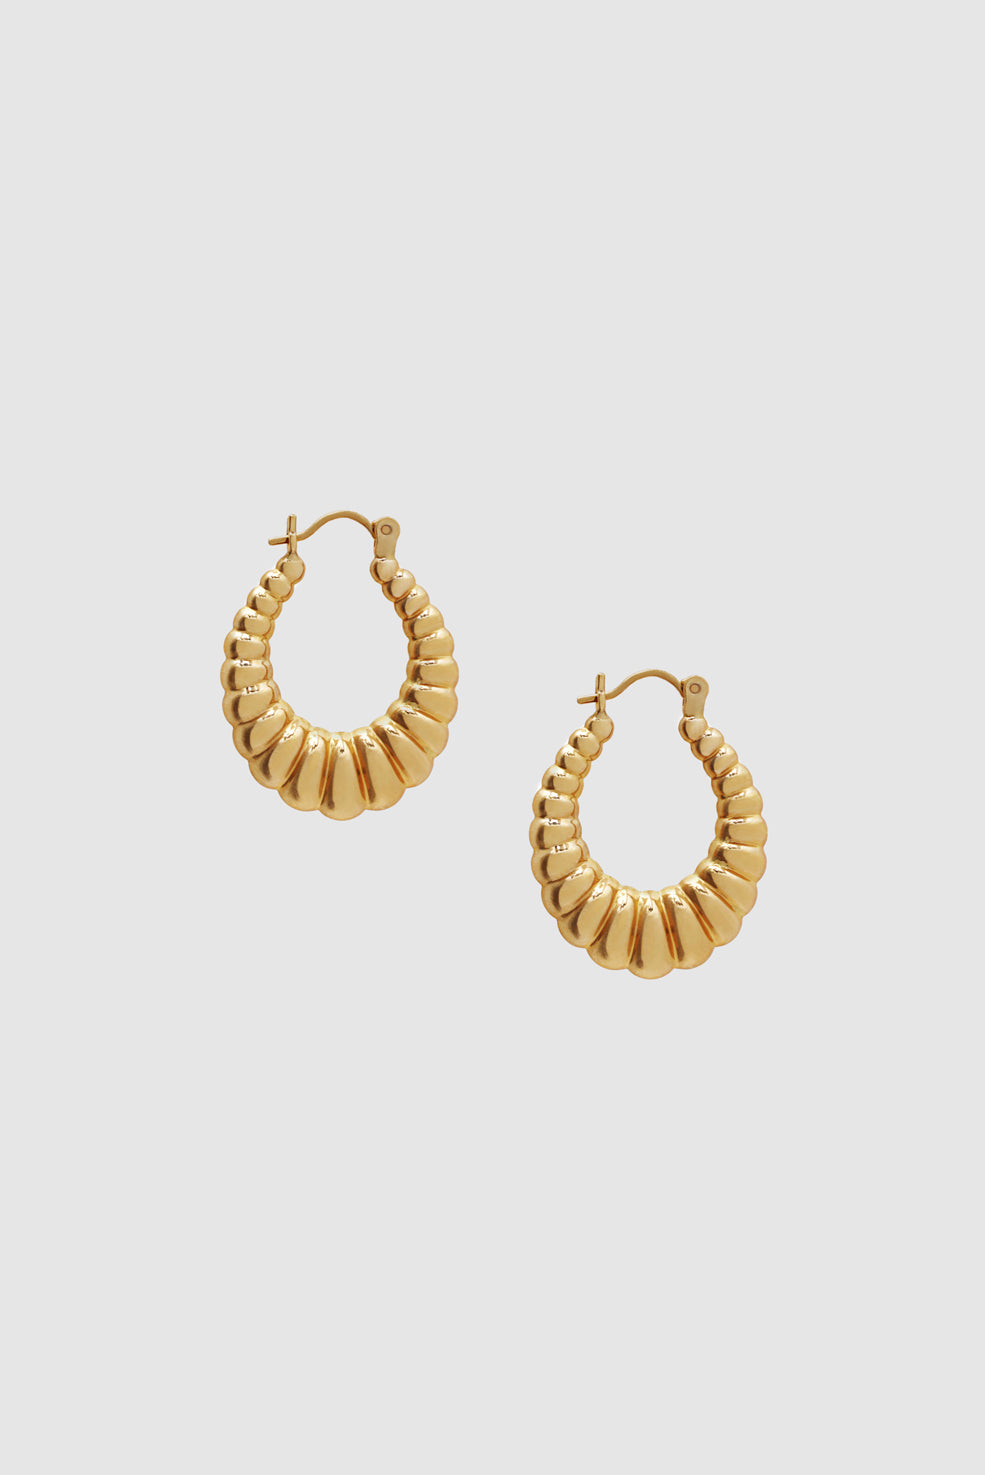 ANINE BING Oval Ribbed Hoop Earrings - 14K Gold - Front View